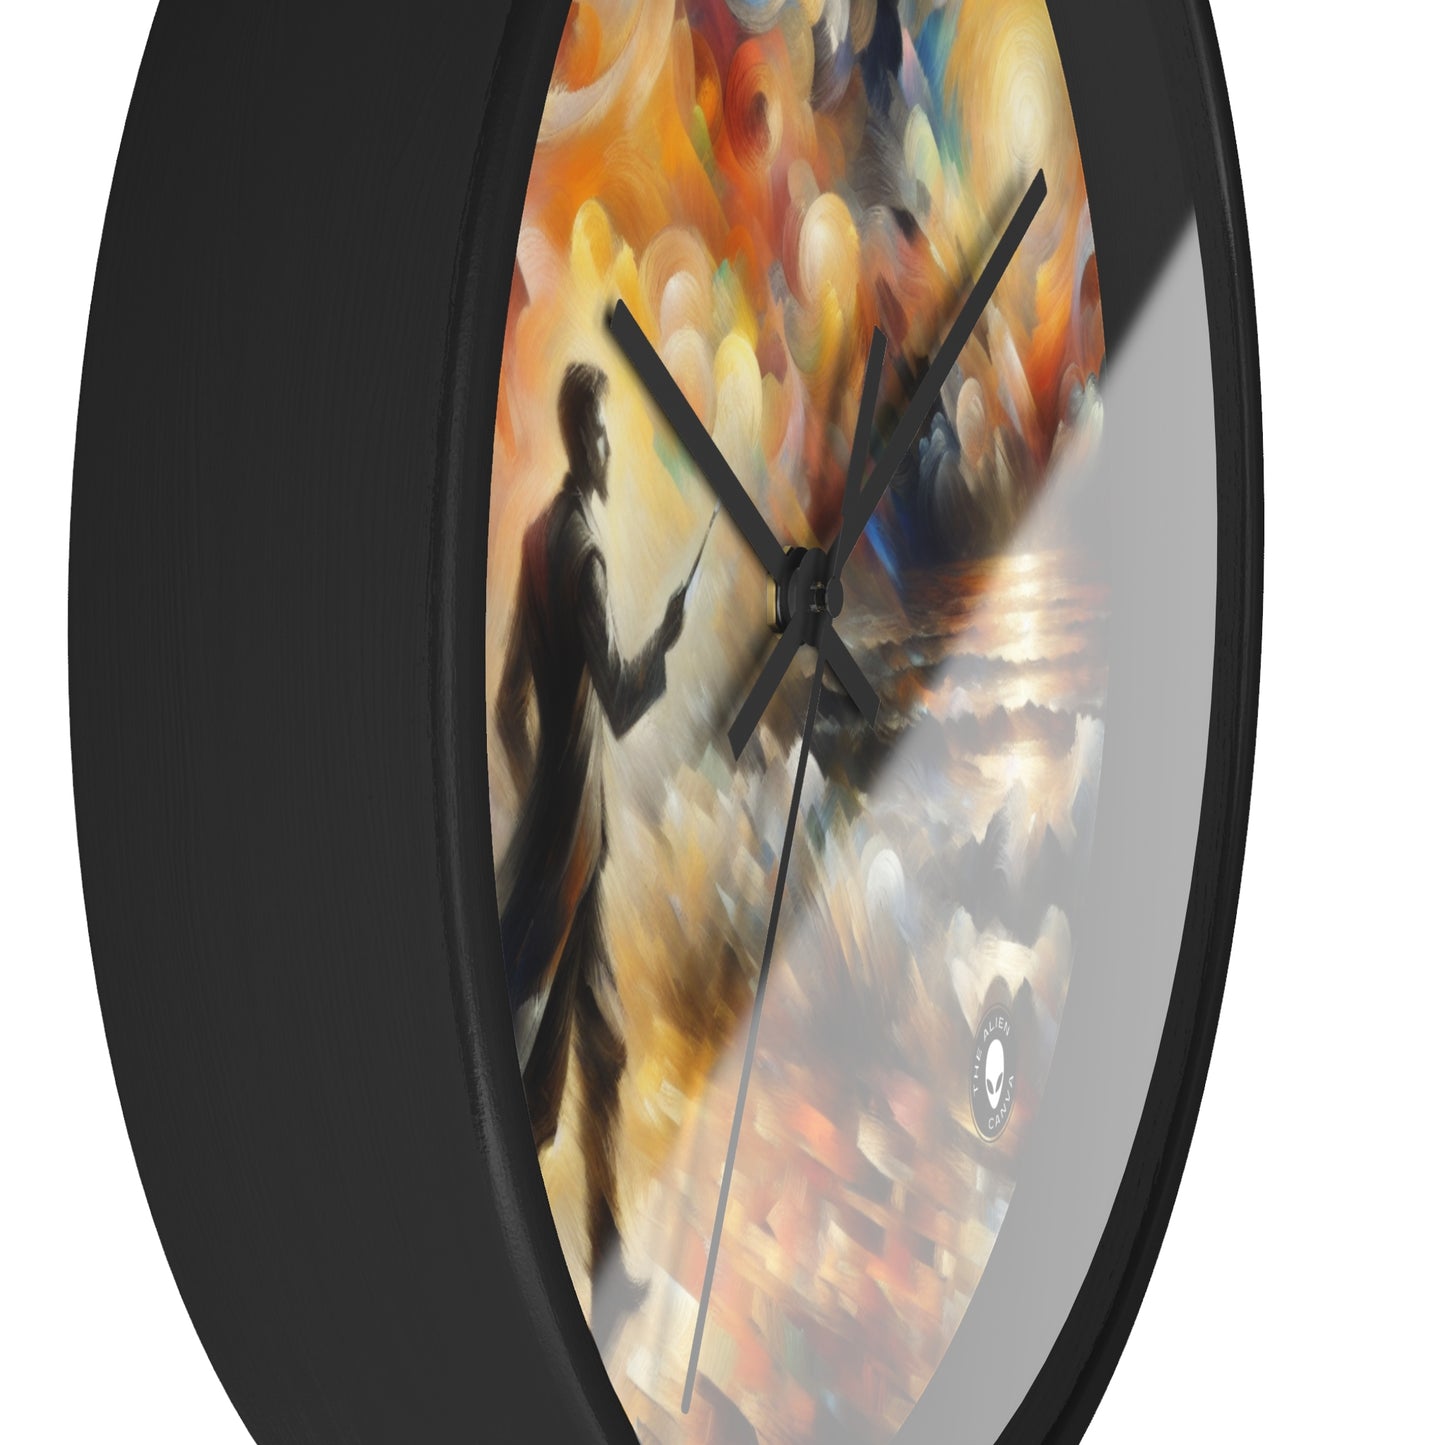 "Metamorphosis in the Enchanted Forest" - The Alien Wall Clock Symbolism